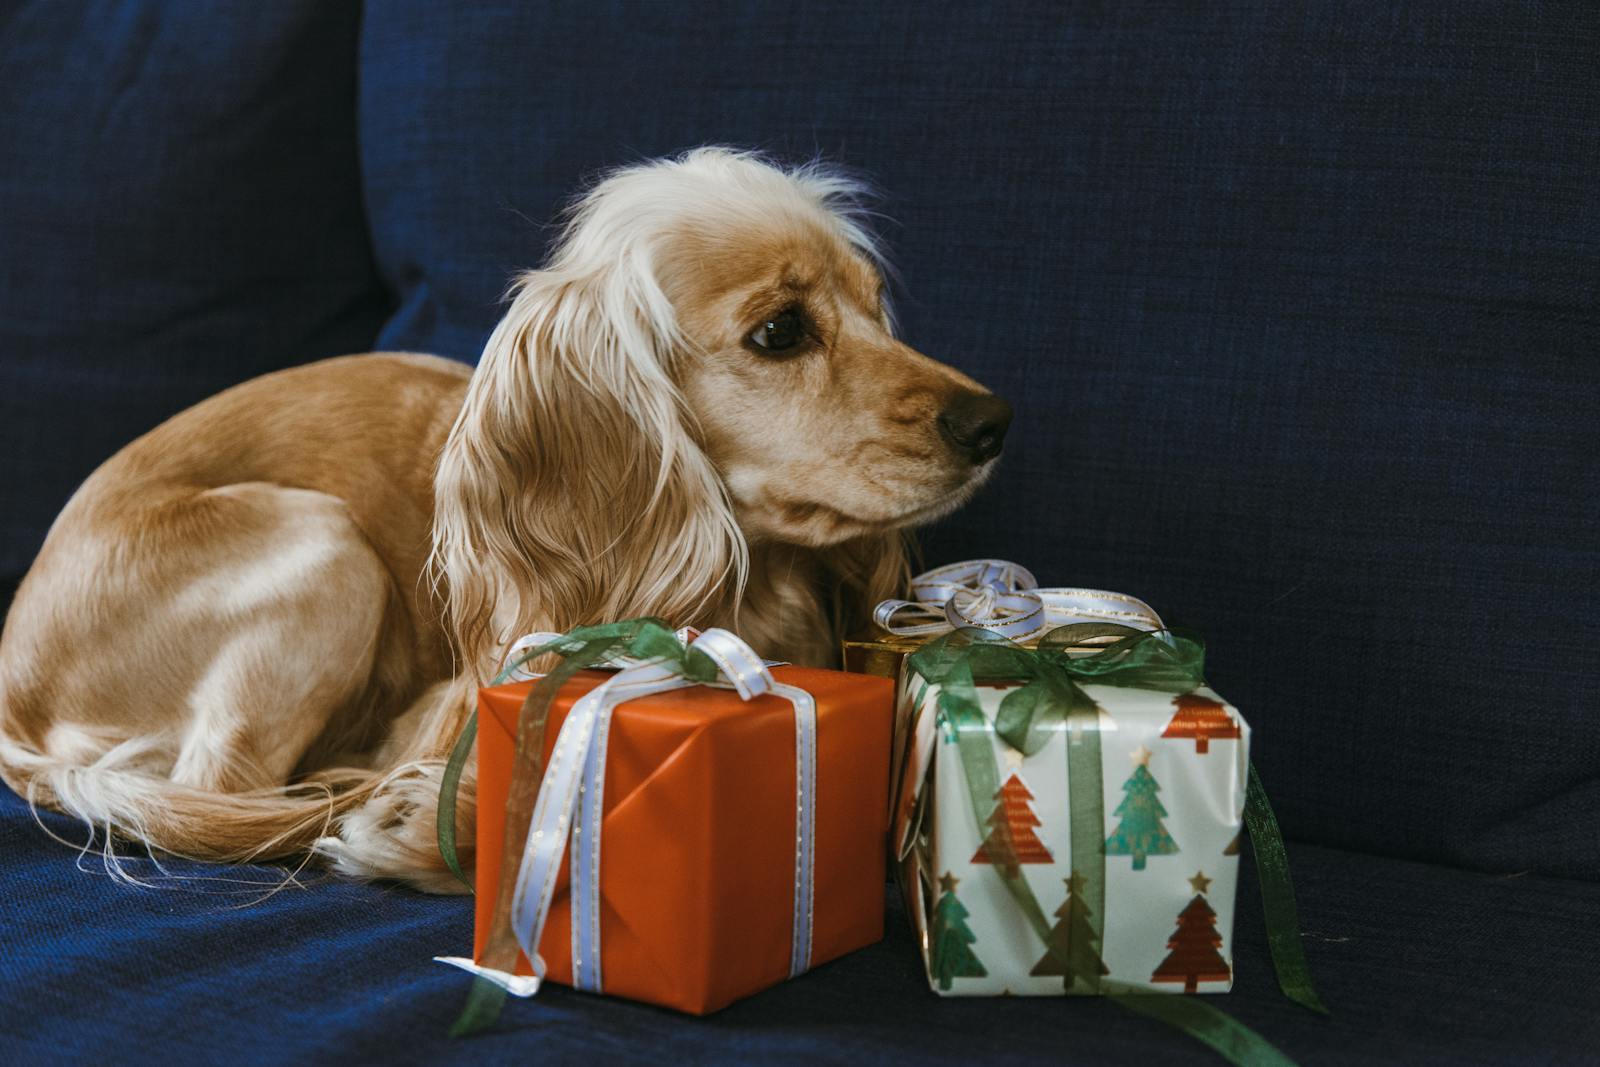 Dog beside boxes of gifts